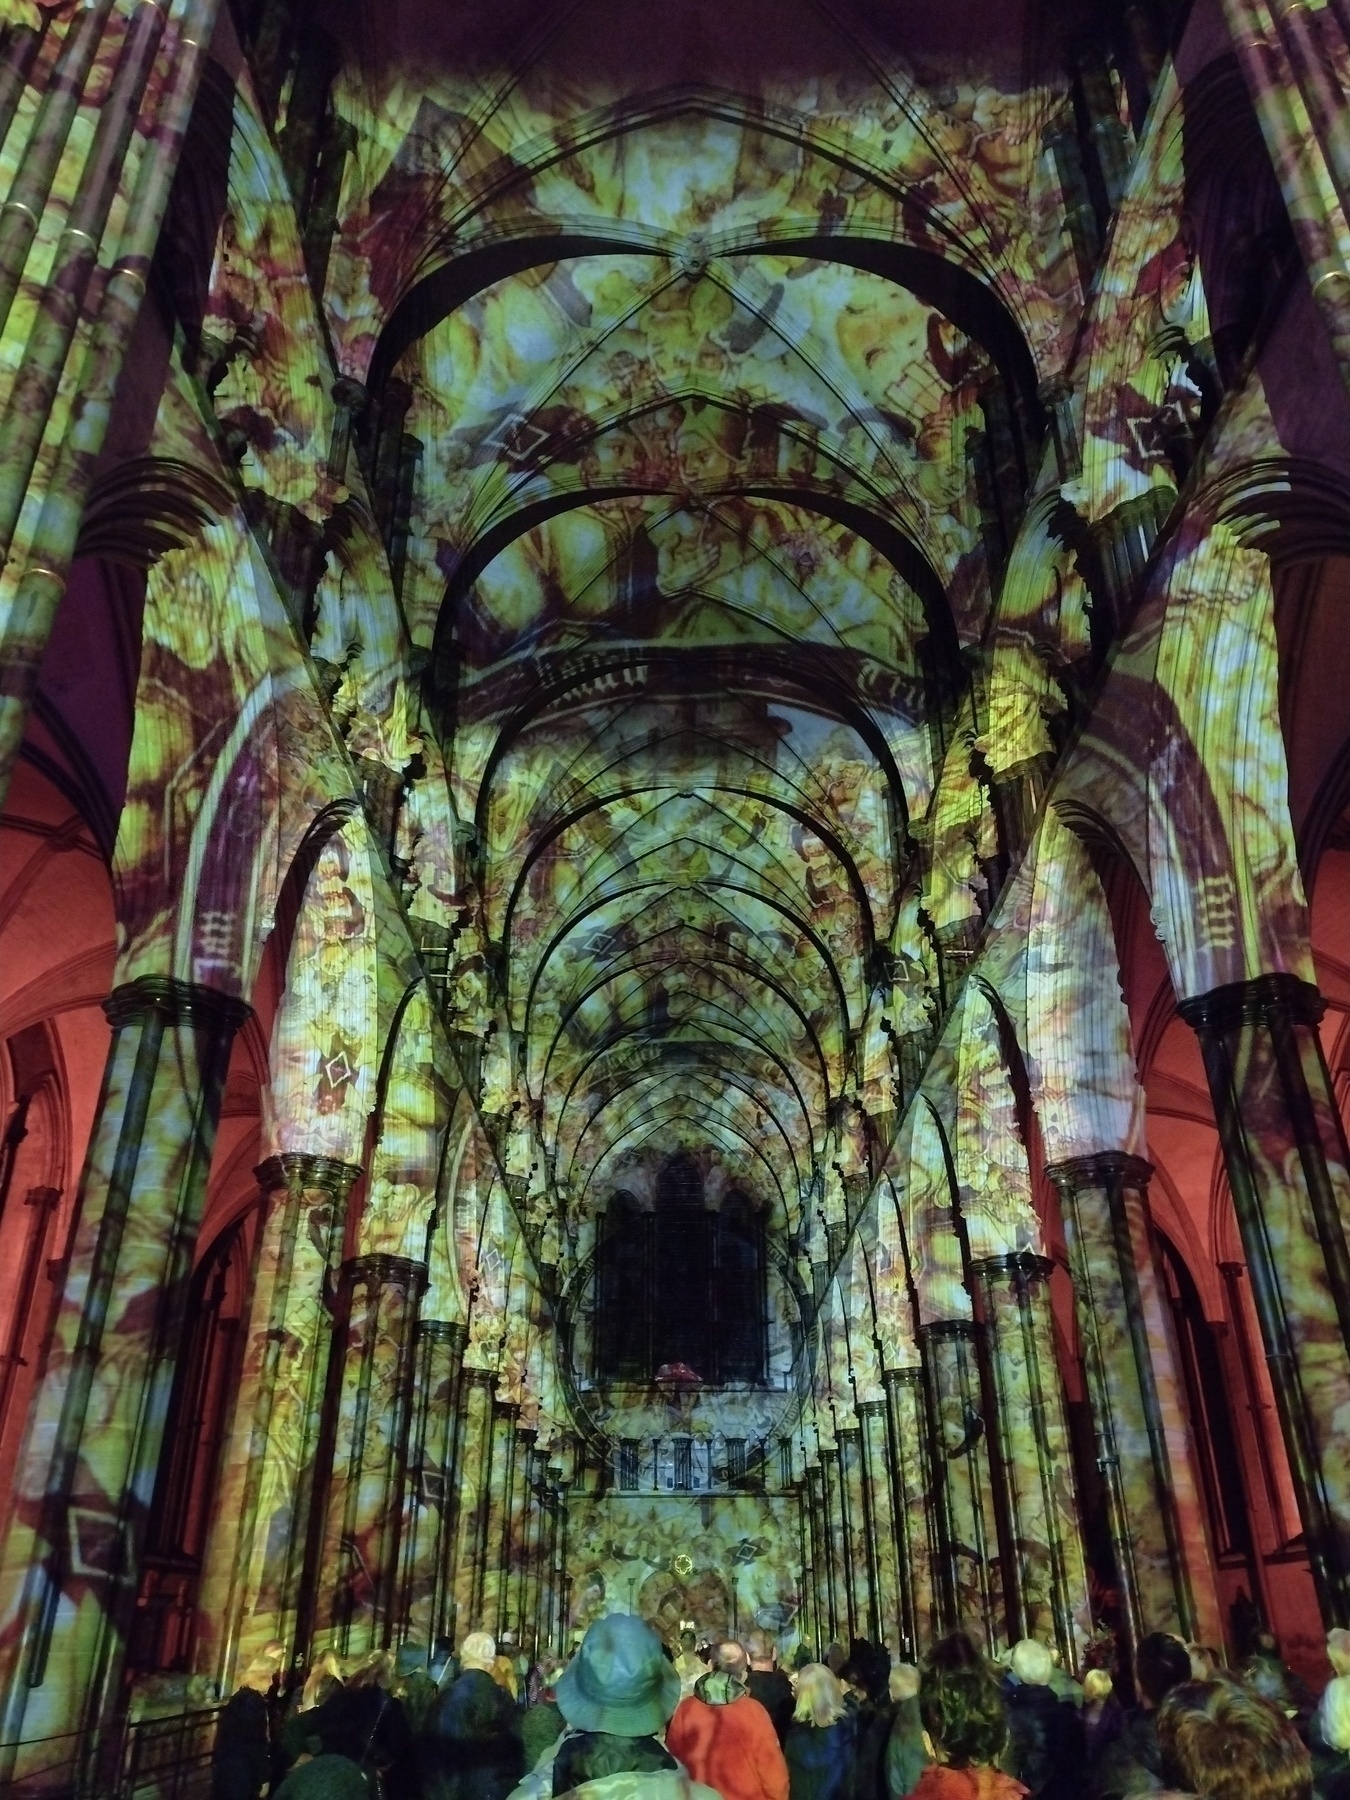 Salisbury cathedral with lots of projections on the walls